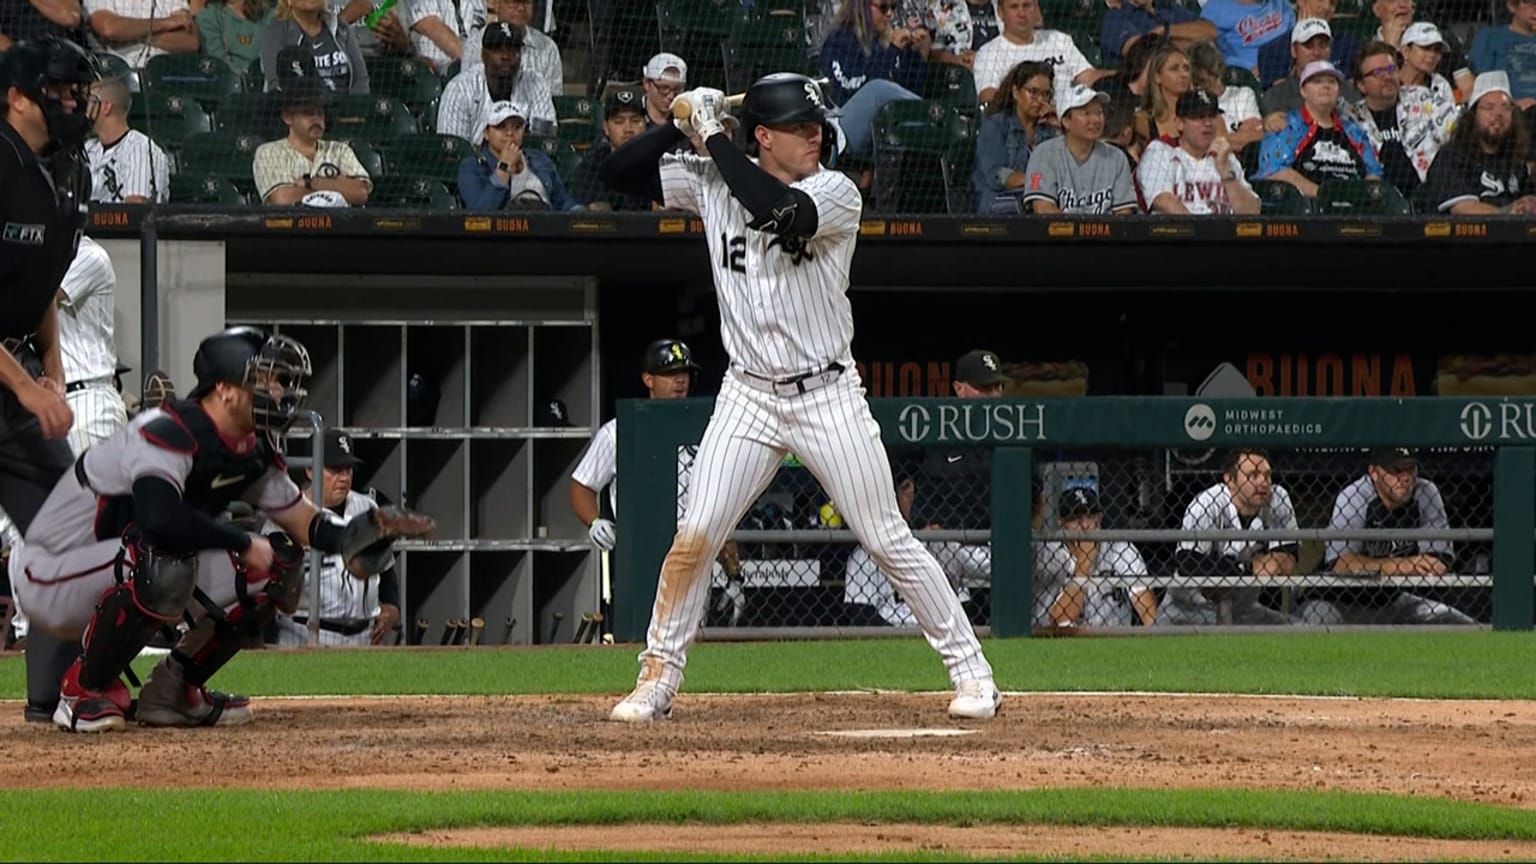 Romy Gonzalez puts on a show in White Sox' 7-3 win vs. Angels 